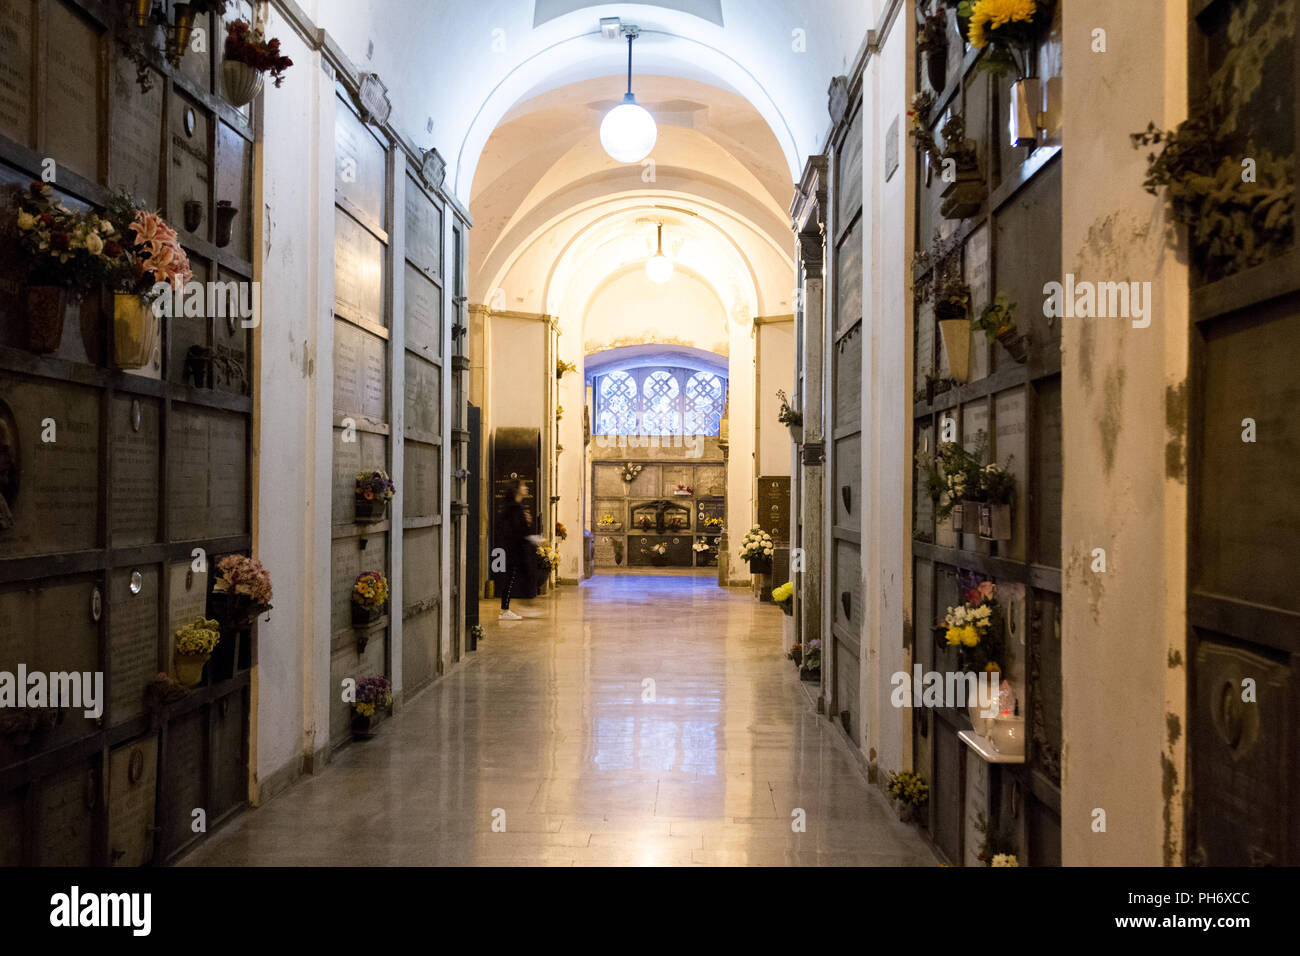 Milano, Italy. 2018/2/8. A columbarium with cinerary urns (with human ashes) at the Cimitero Monumentale ('Monumental Cemetery') in Milan, Italy. Stock Photo